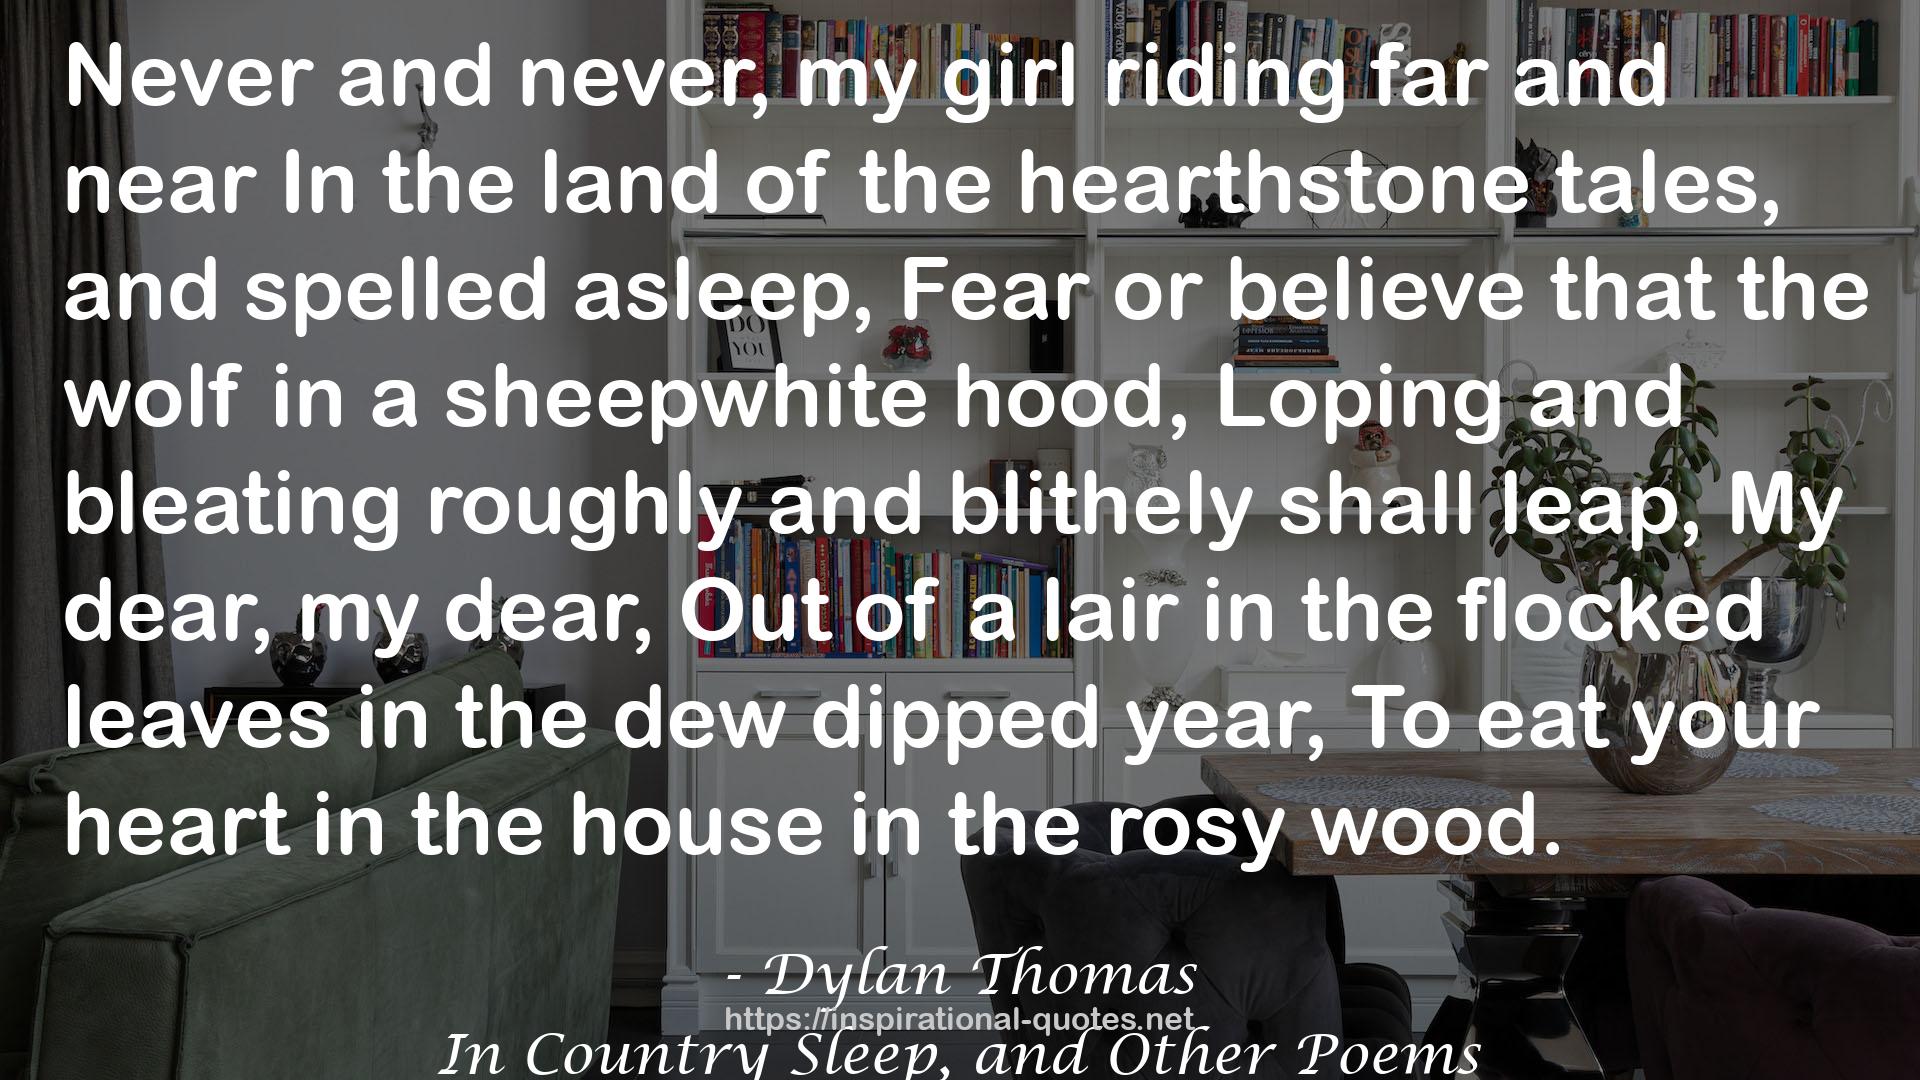 In Country Sleep, and Other Poems QUOTES